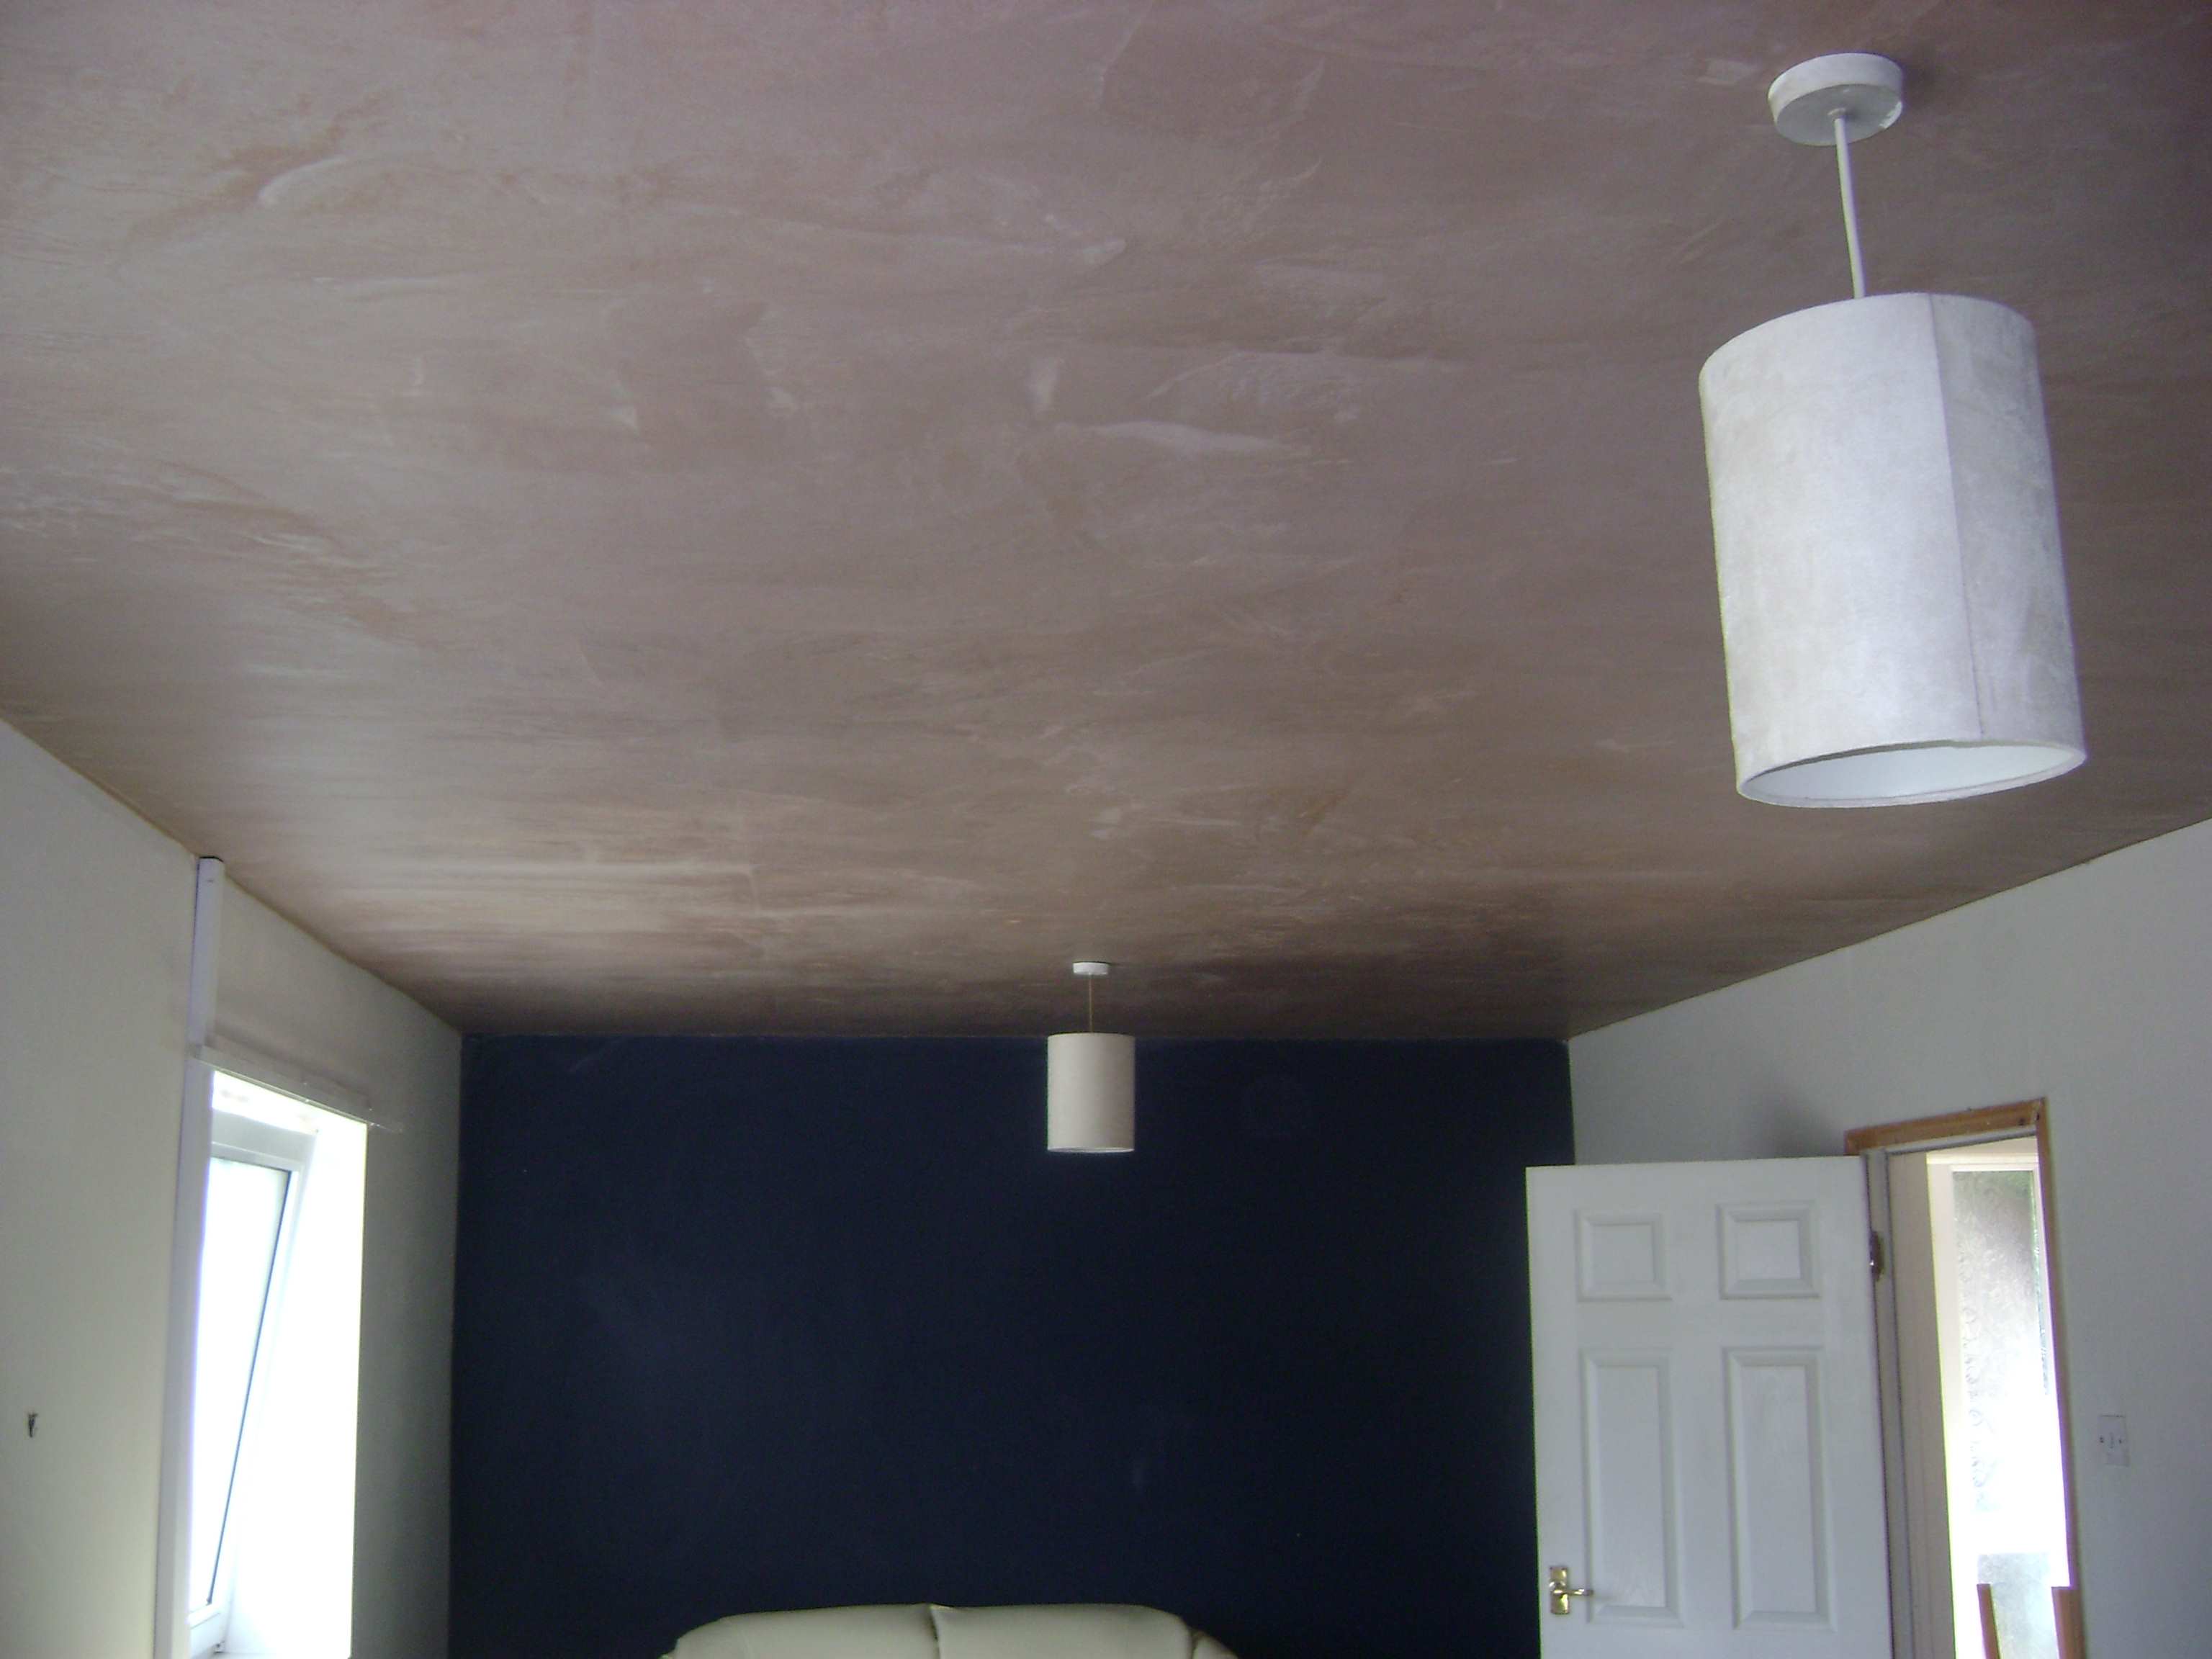 The ceiling once plastering is completed